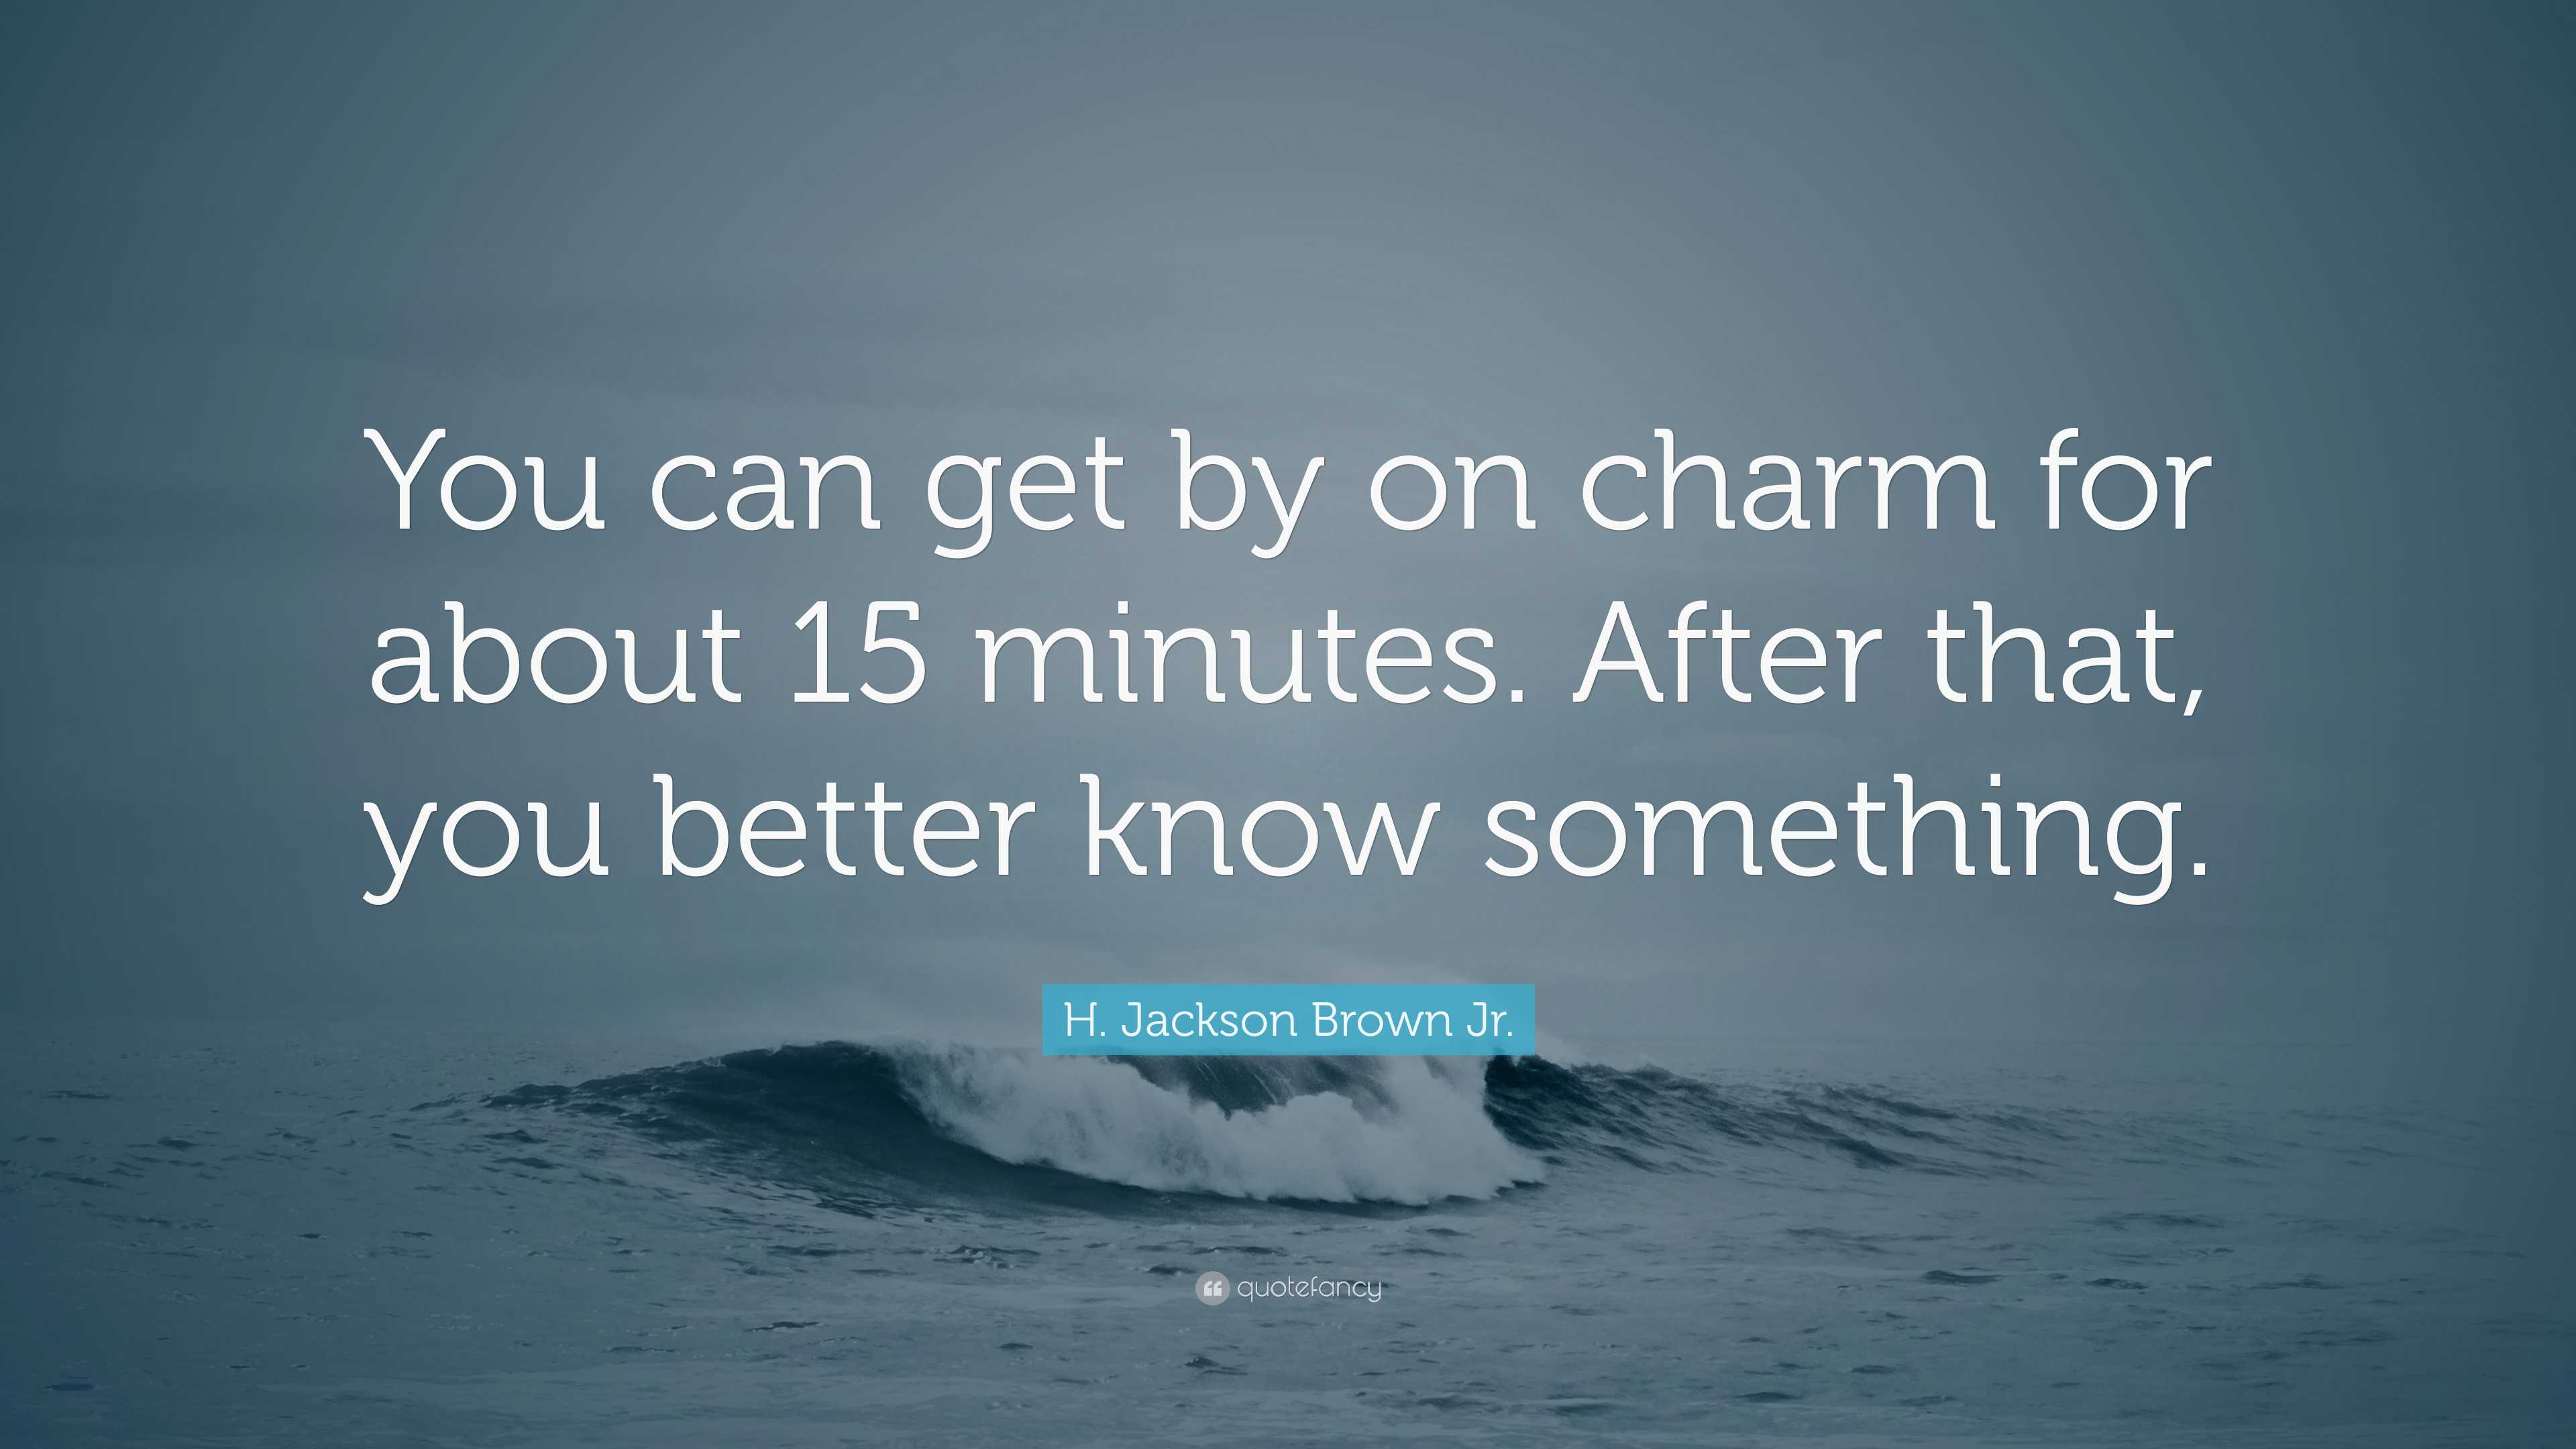 H. Jackson Brown Jr. Quote: “You can get by on charm for about